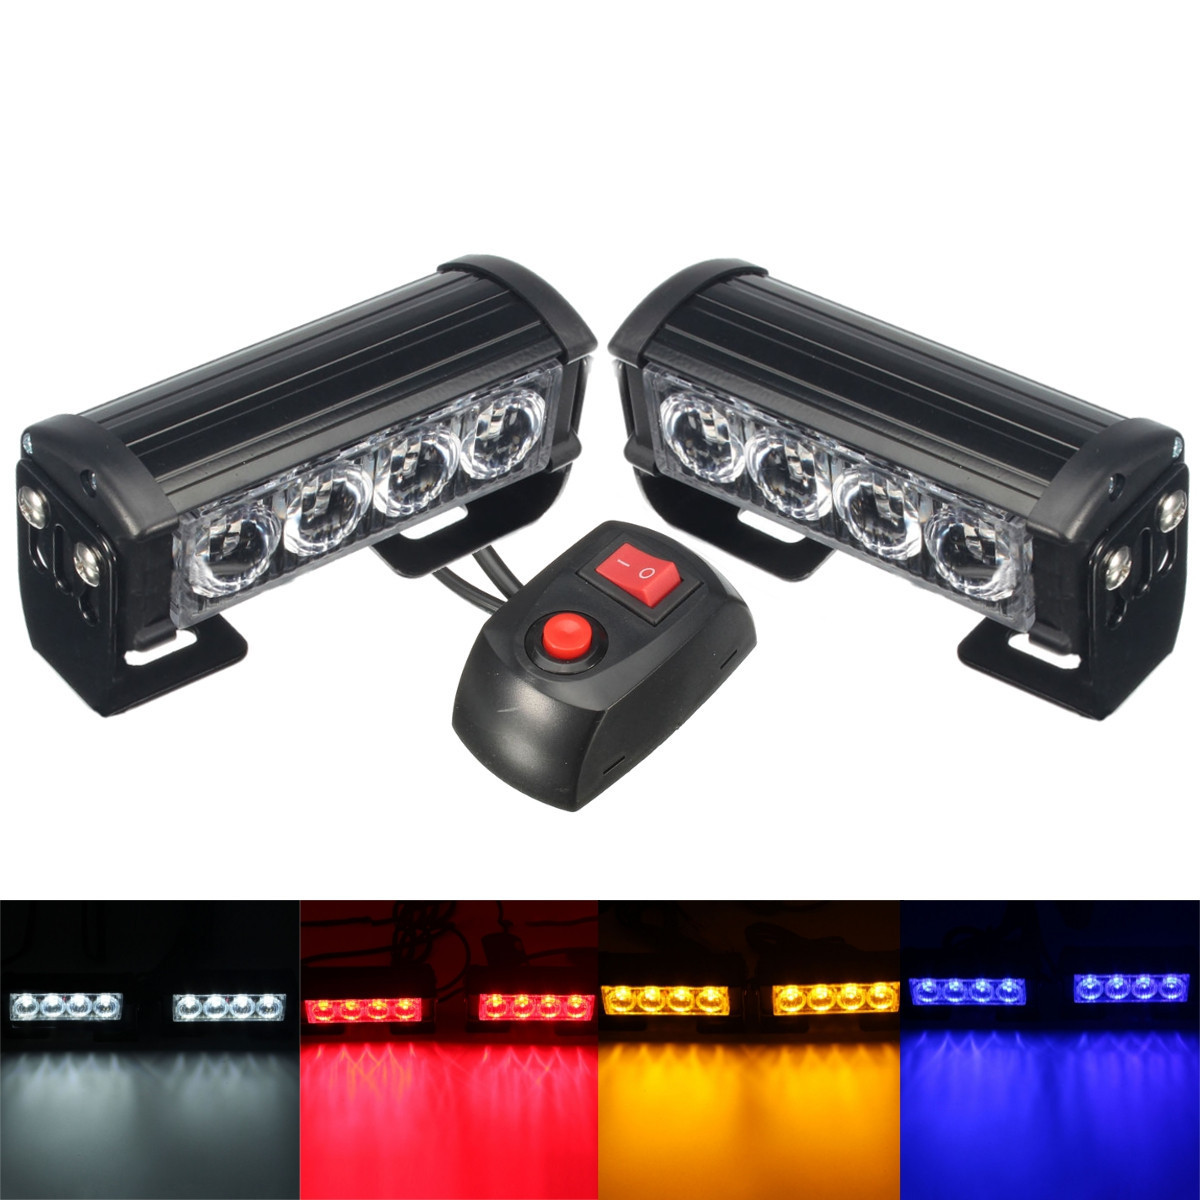 

2PCS 12V LED Strobe Flash Lights Front Grille Warning Lamp Waterproof with 7 Flashing Modes Switch for Truck Lorry Trailer